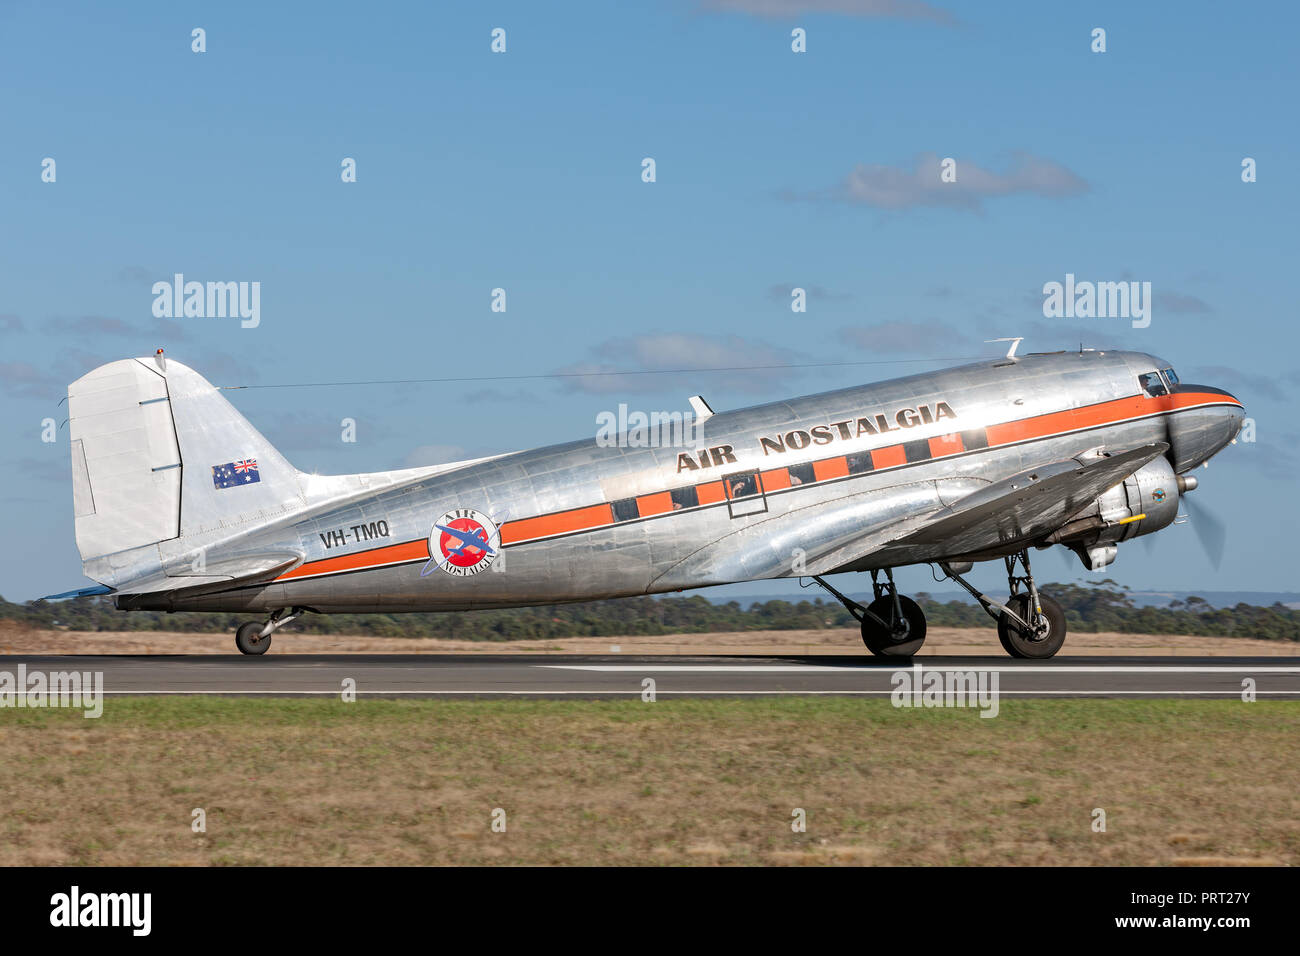 Vintage Douglas DC-3 airliner VH-TMQ operated by Air Nostalgia (Shortstop jet Charters). Stock Photo